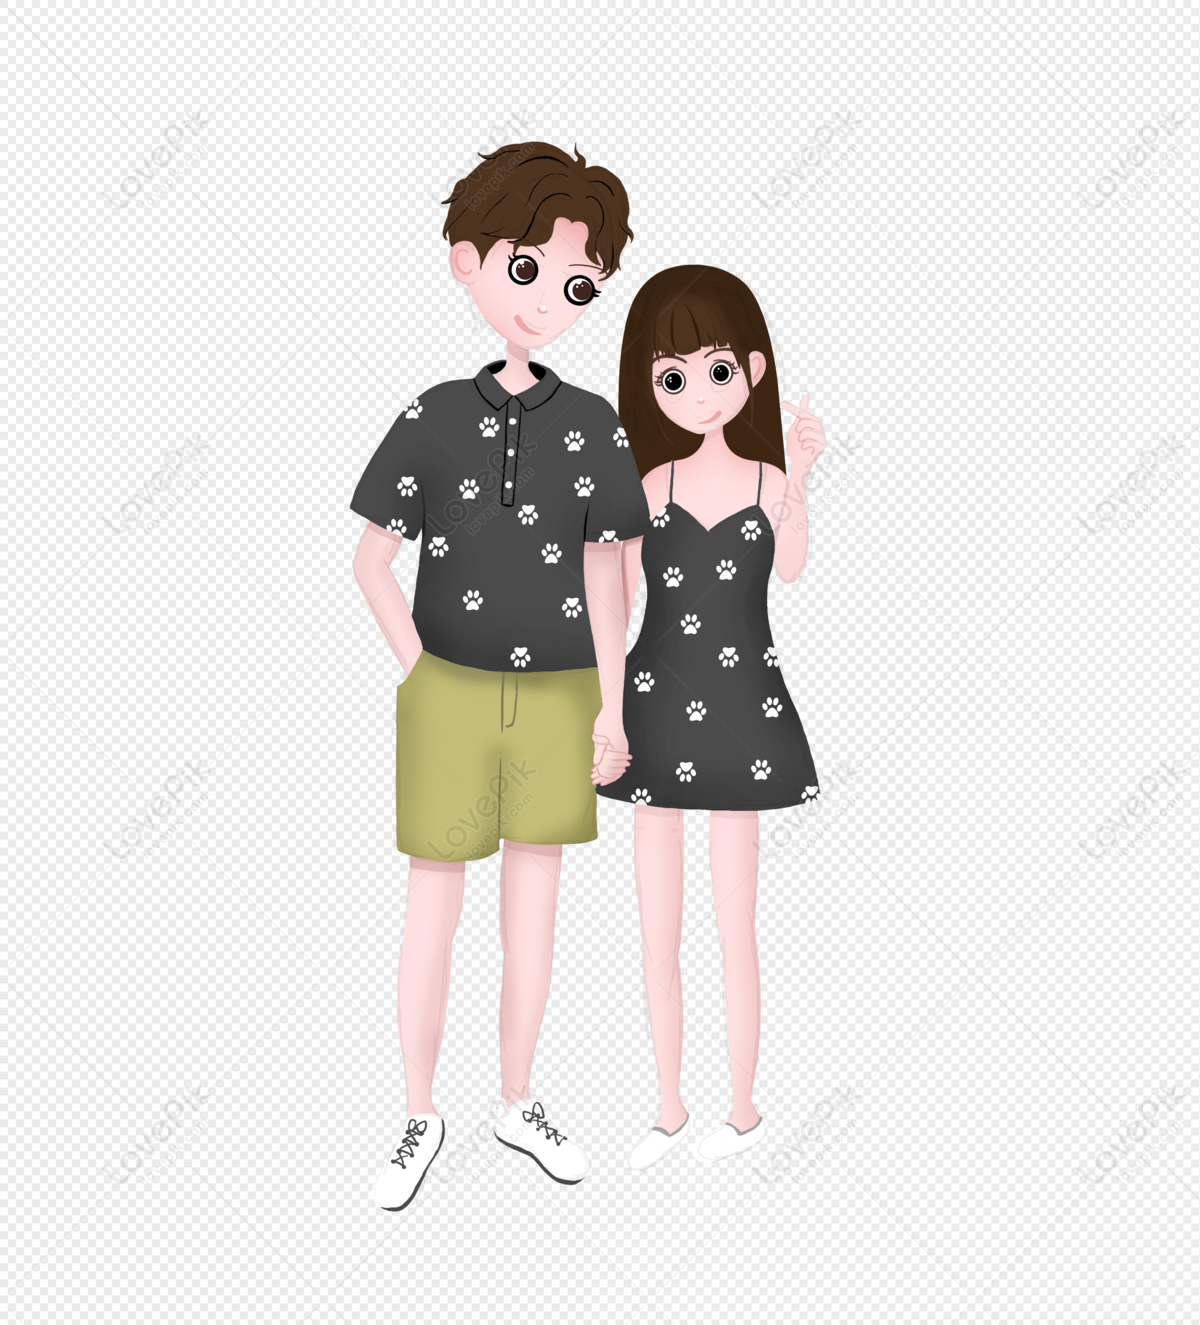 Couple Of Lovers PNG Image And Clipart Image For Free Download - Lovepik |  401440818